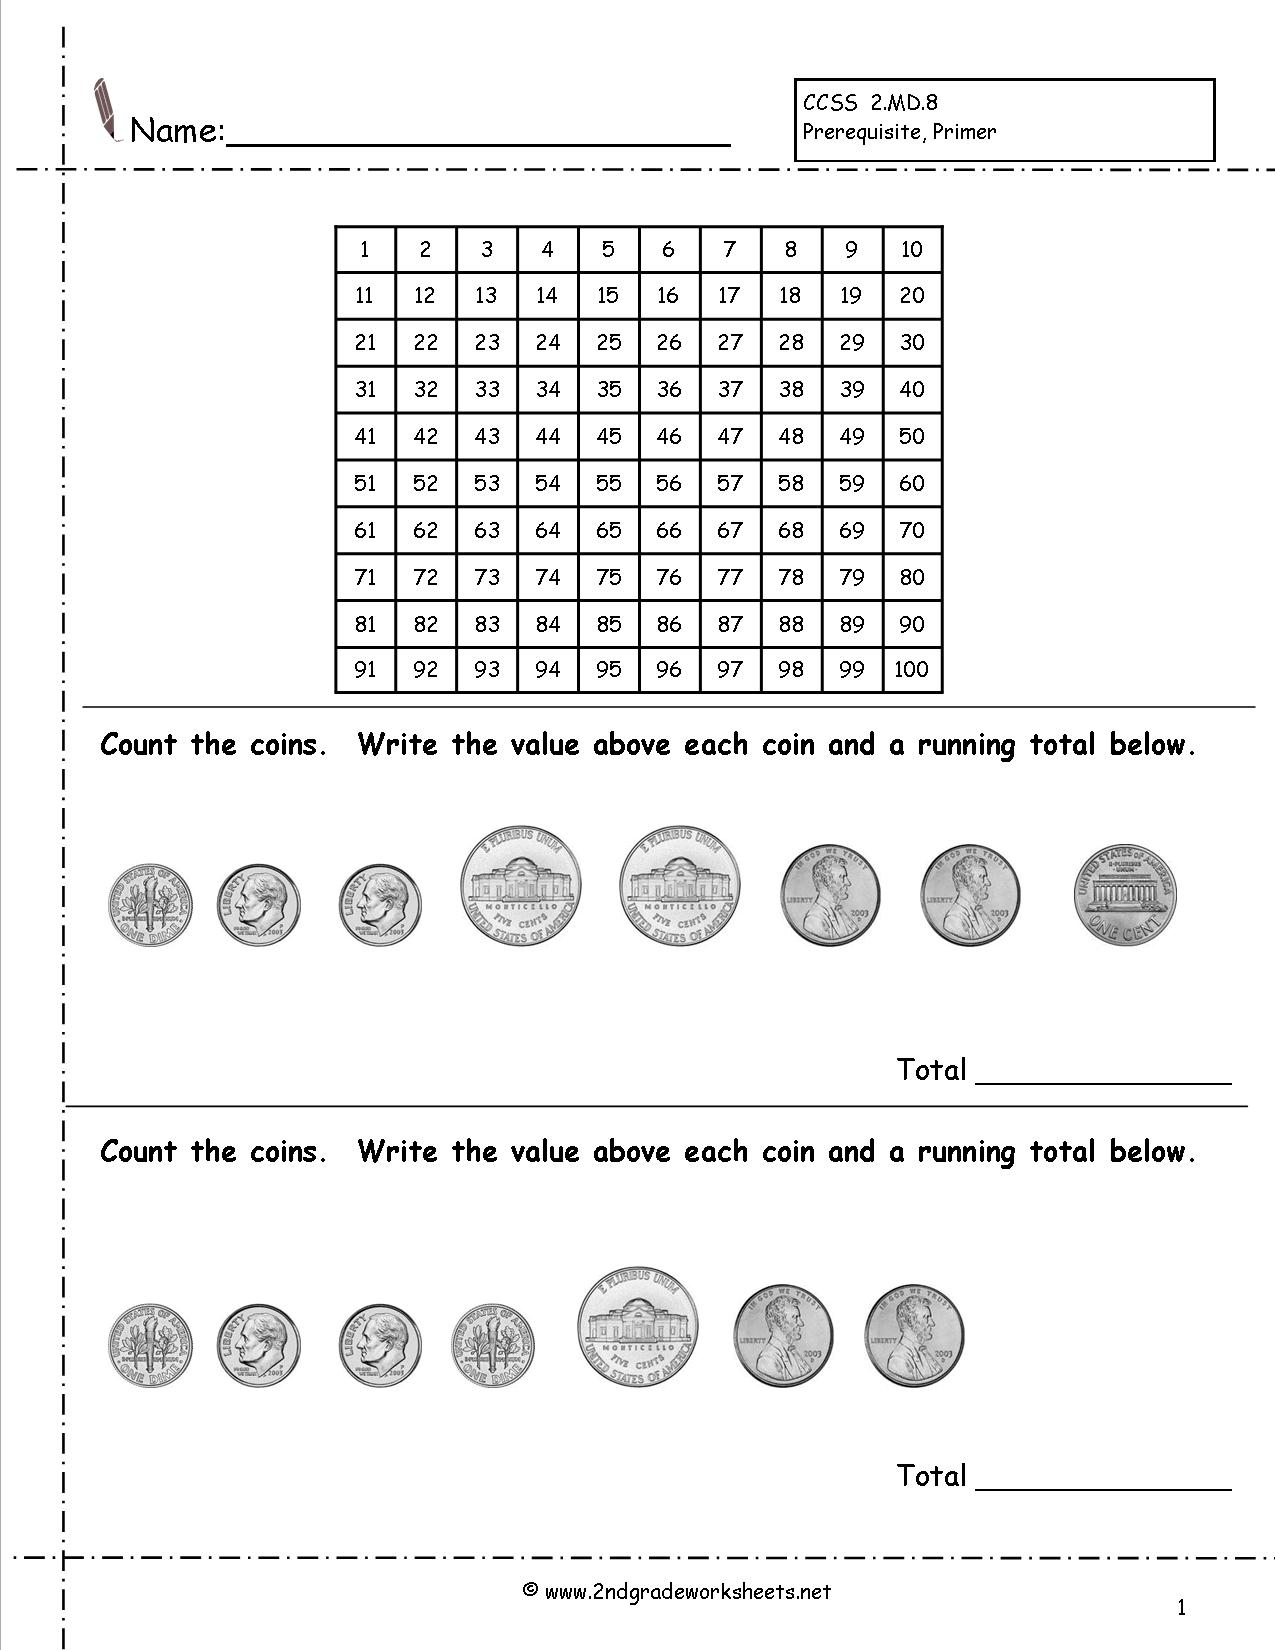 Counting Coins And Money Worksheets And Printouts - Free Printable Money Worksheets